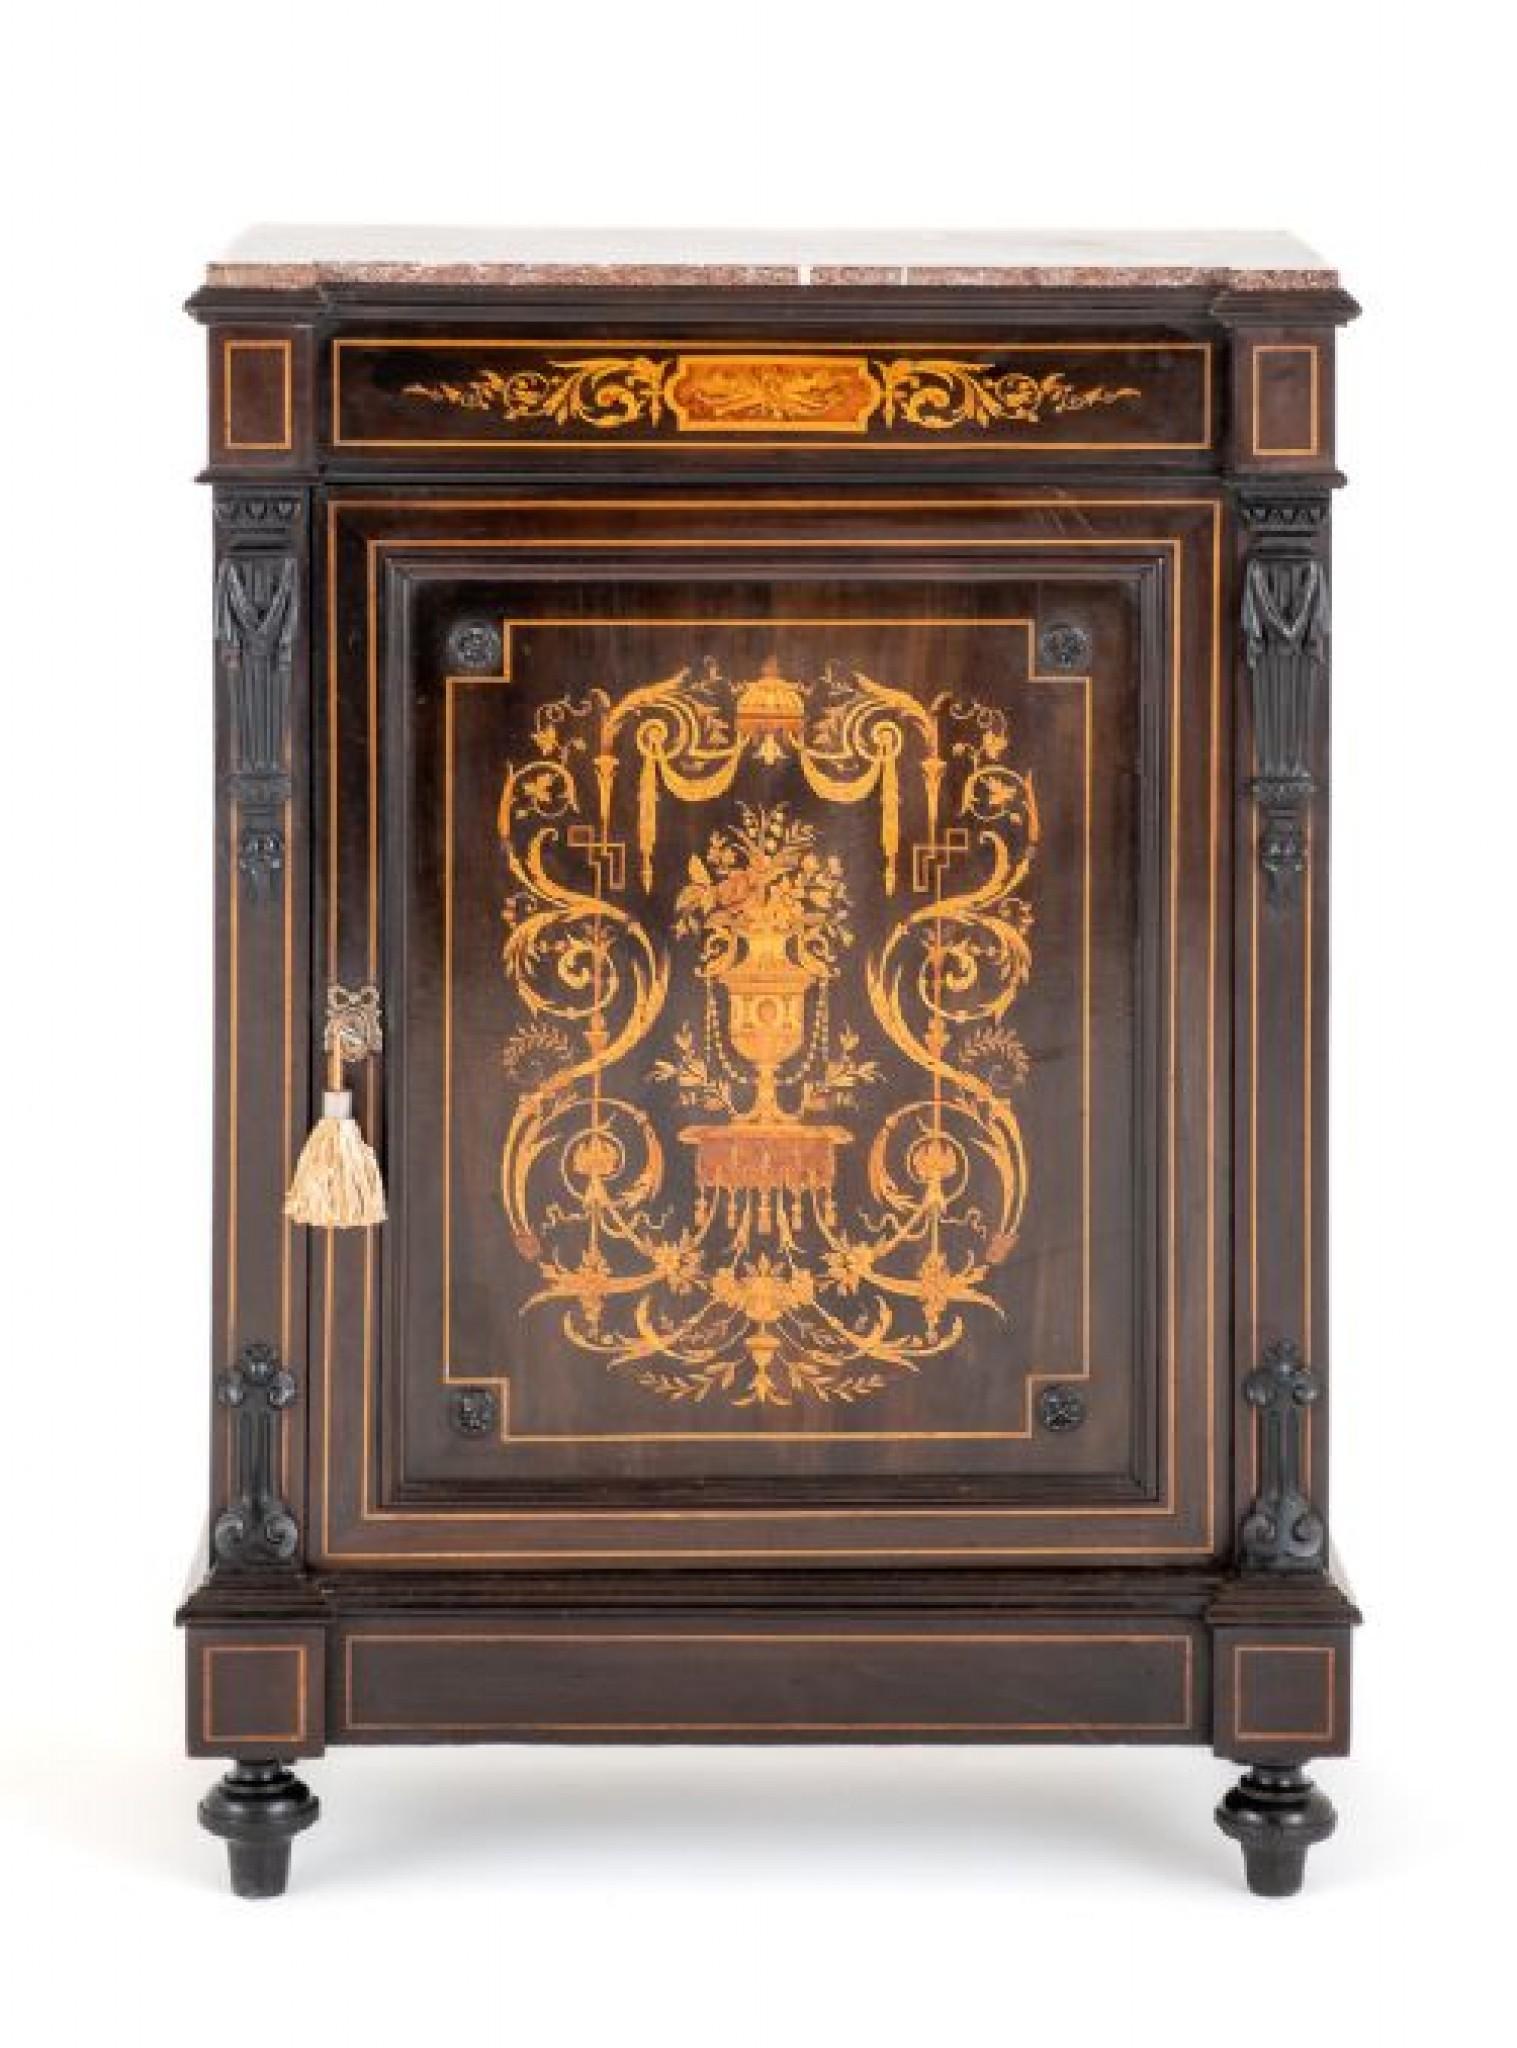 Here We Have a Quality French Marquetry Pier Cabinet.
The Cabinet Stands Upon Bun Feet.
The Central Door Having a Floral Marquetry Panel Featuring Urns, Flowers, Swags Etc.
The Door Being Flanked By Pilasters Which Feature Carved Mounts.
The